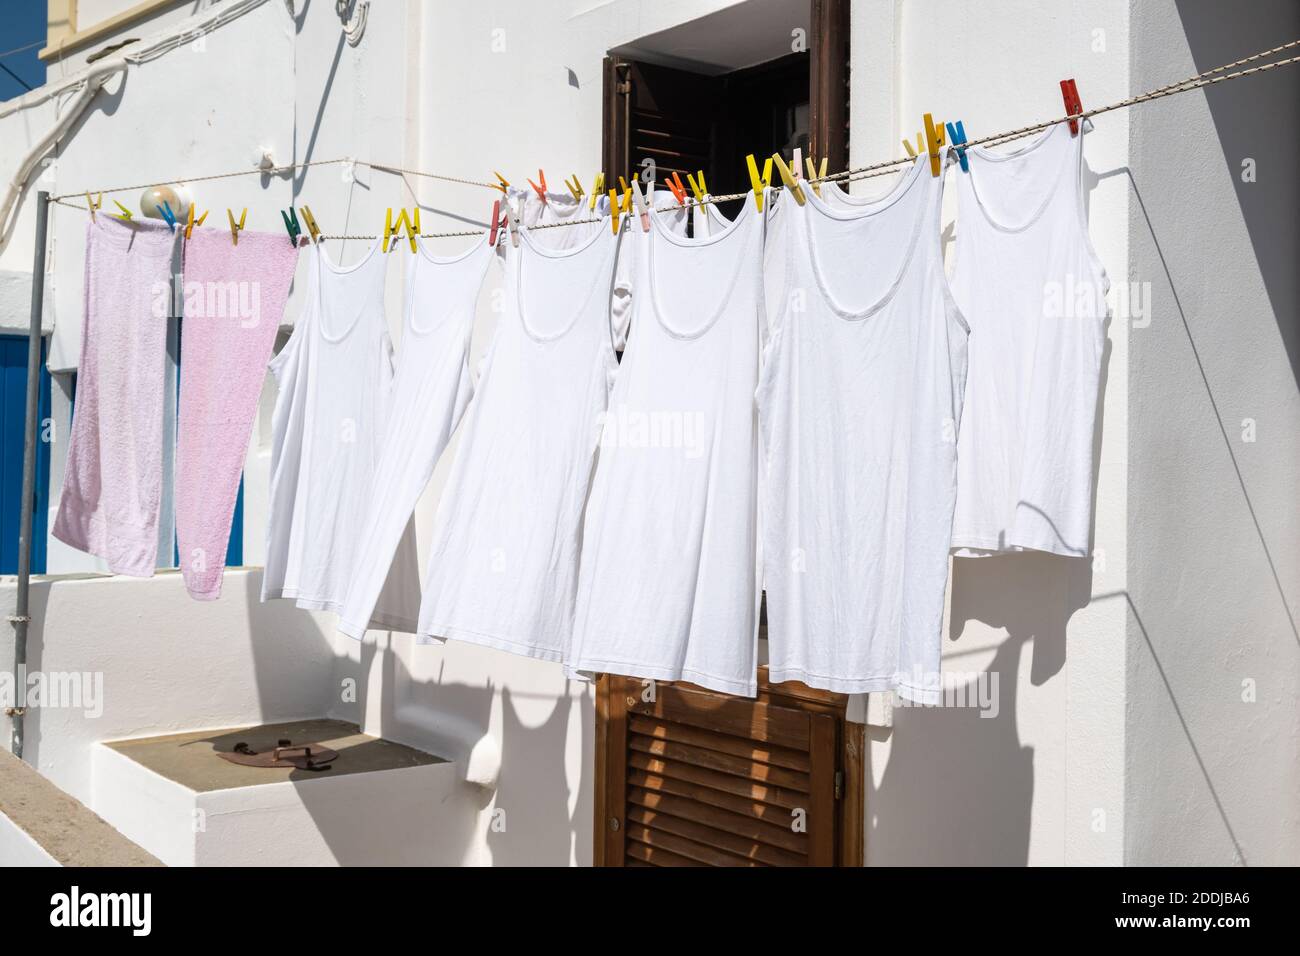 Clothes drying in the sun on a street in Greece Stock Photo